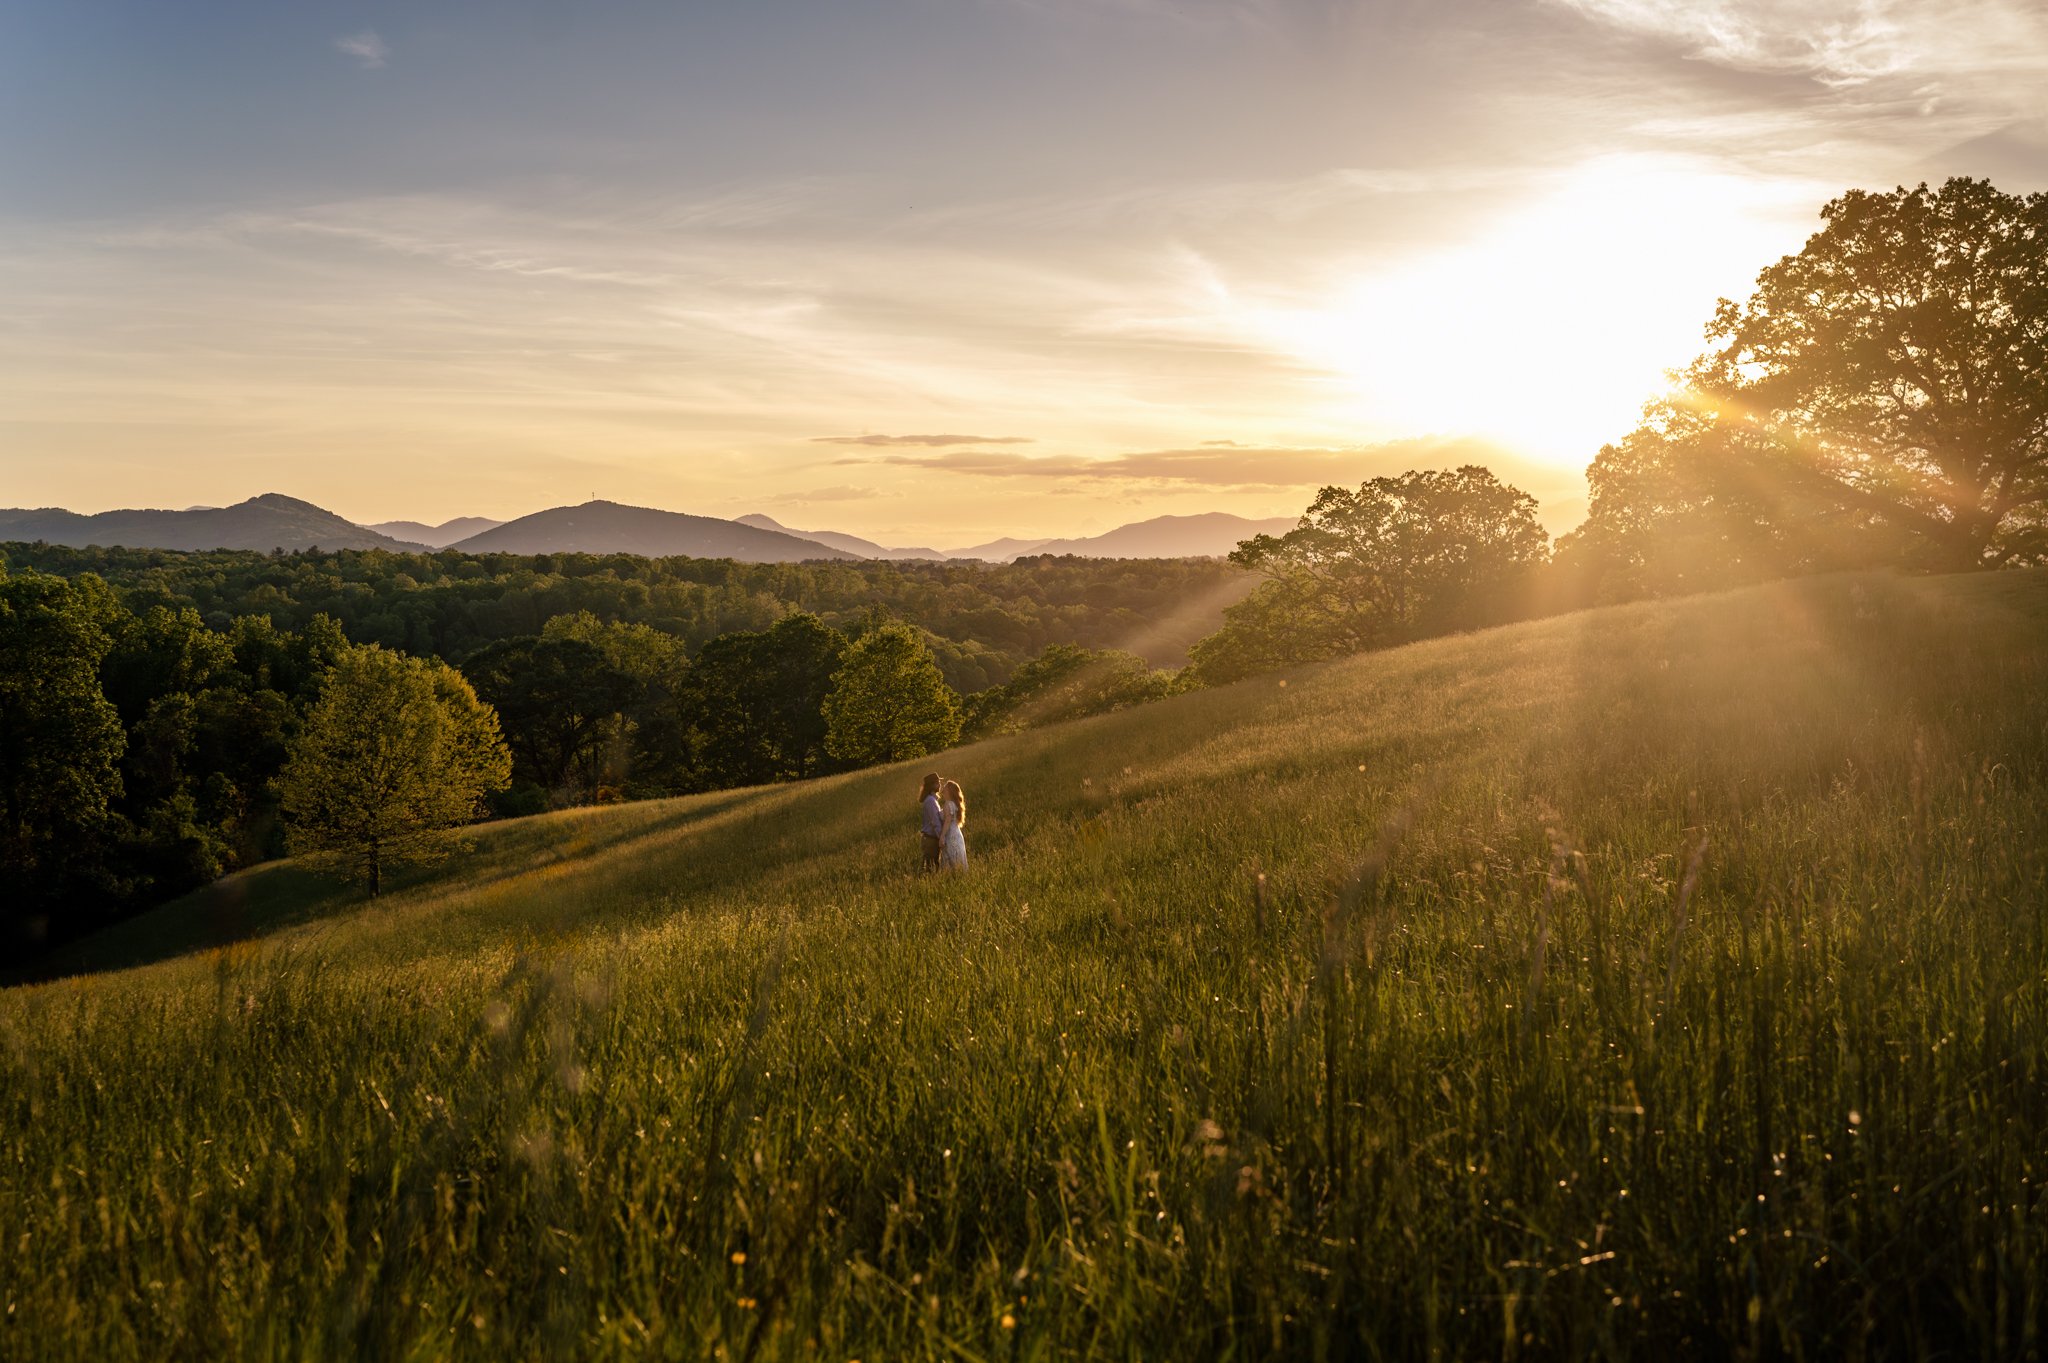 A couple walking in a grassy field on the Biltmore Estate at sunset with trees and distant mountains in the background.